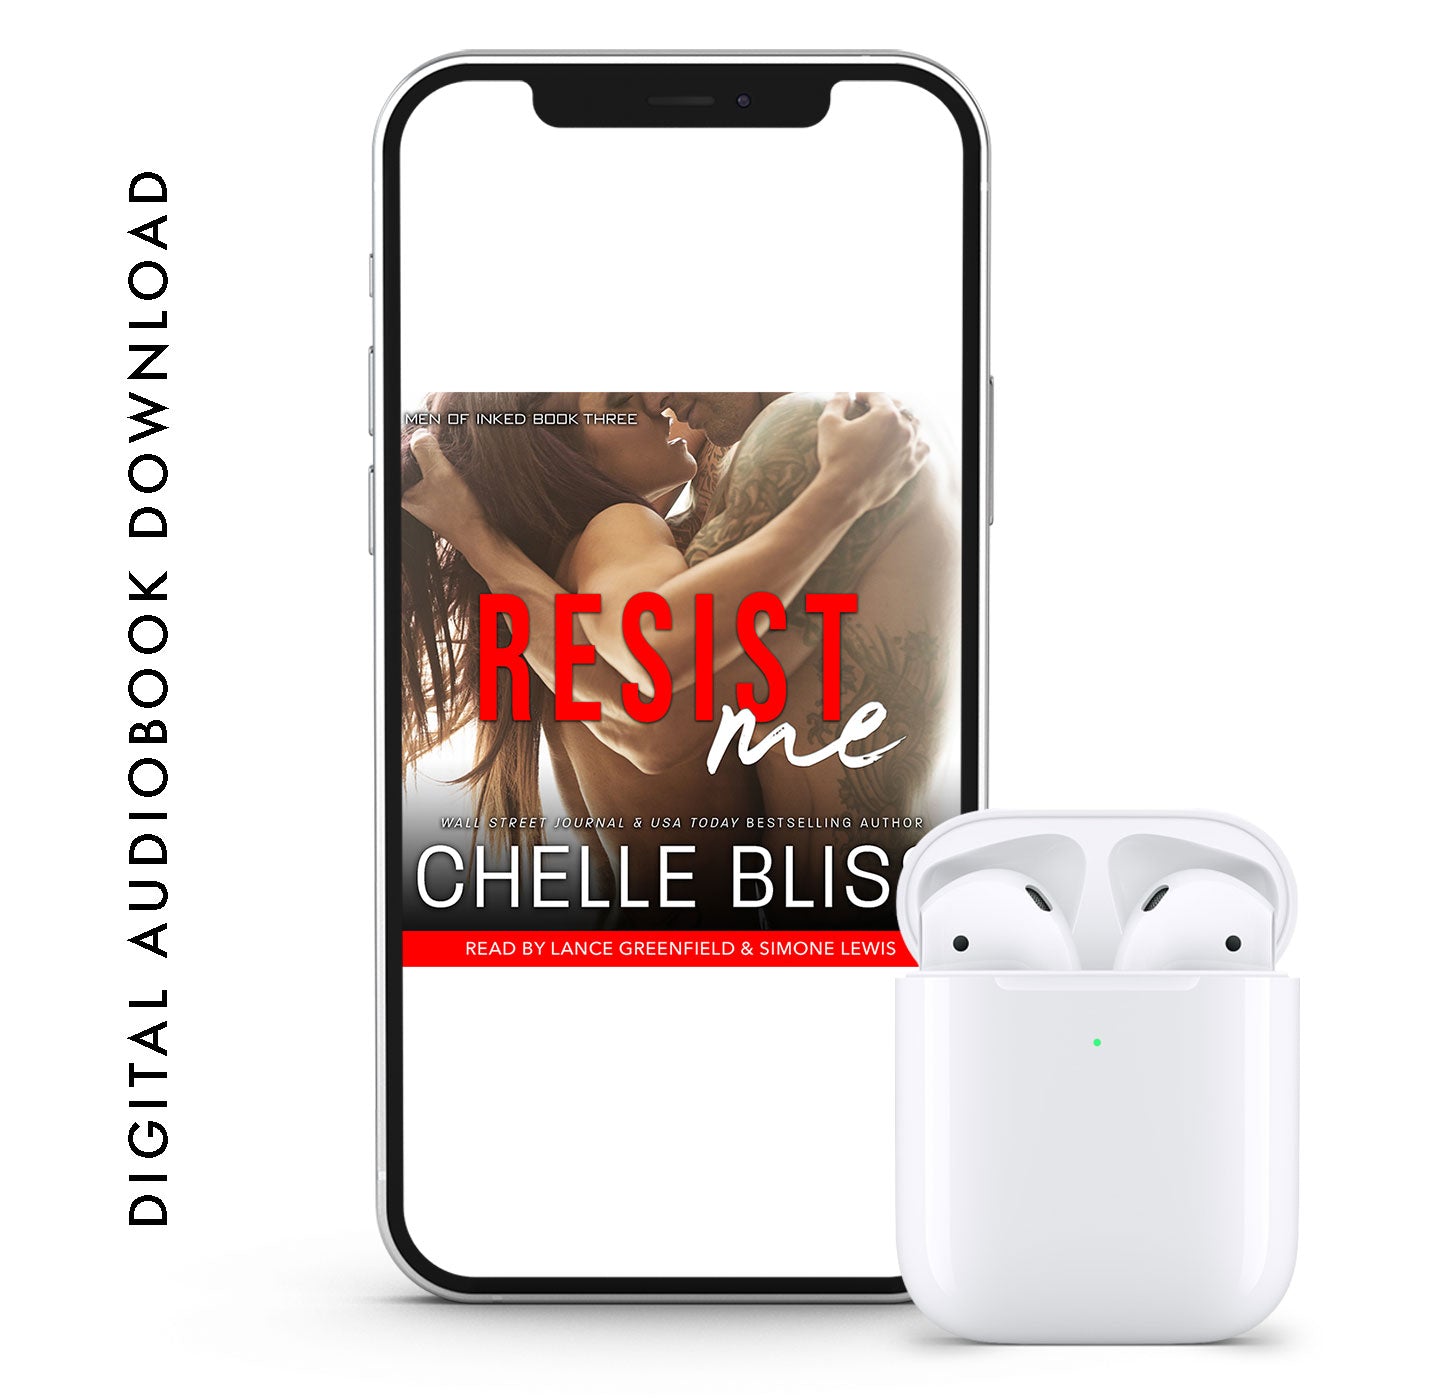 resist me audiobook by chelle bliss couple embracing 